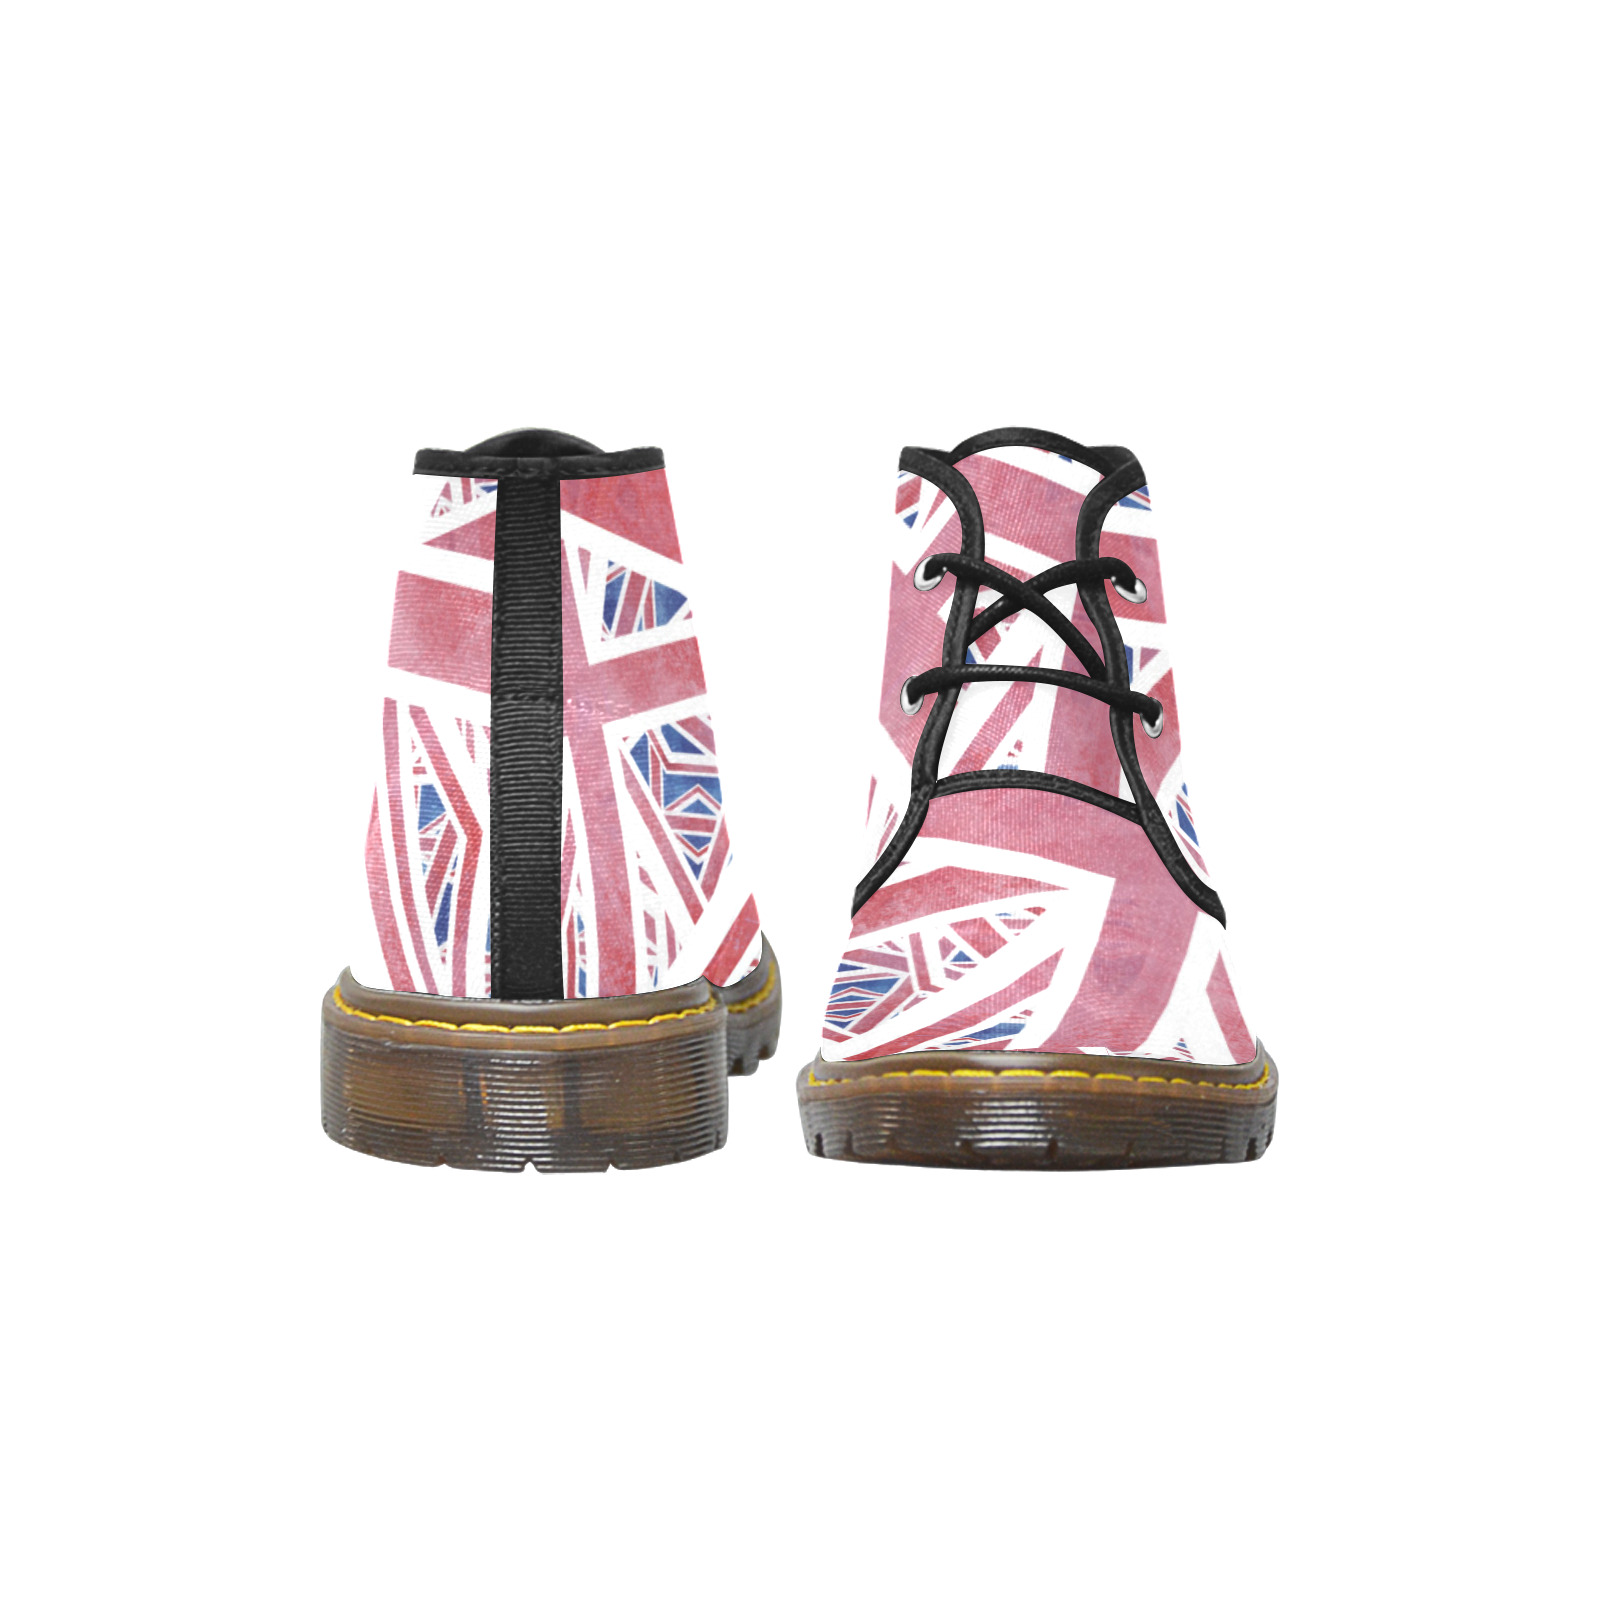 Abstract Union Jack British Flag Collage Women's Canvas Chukka Boots (Model 2402-1)